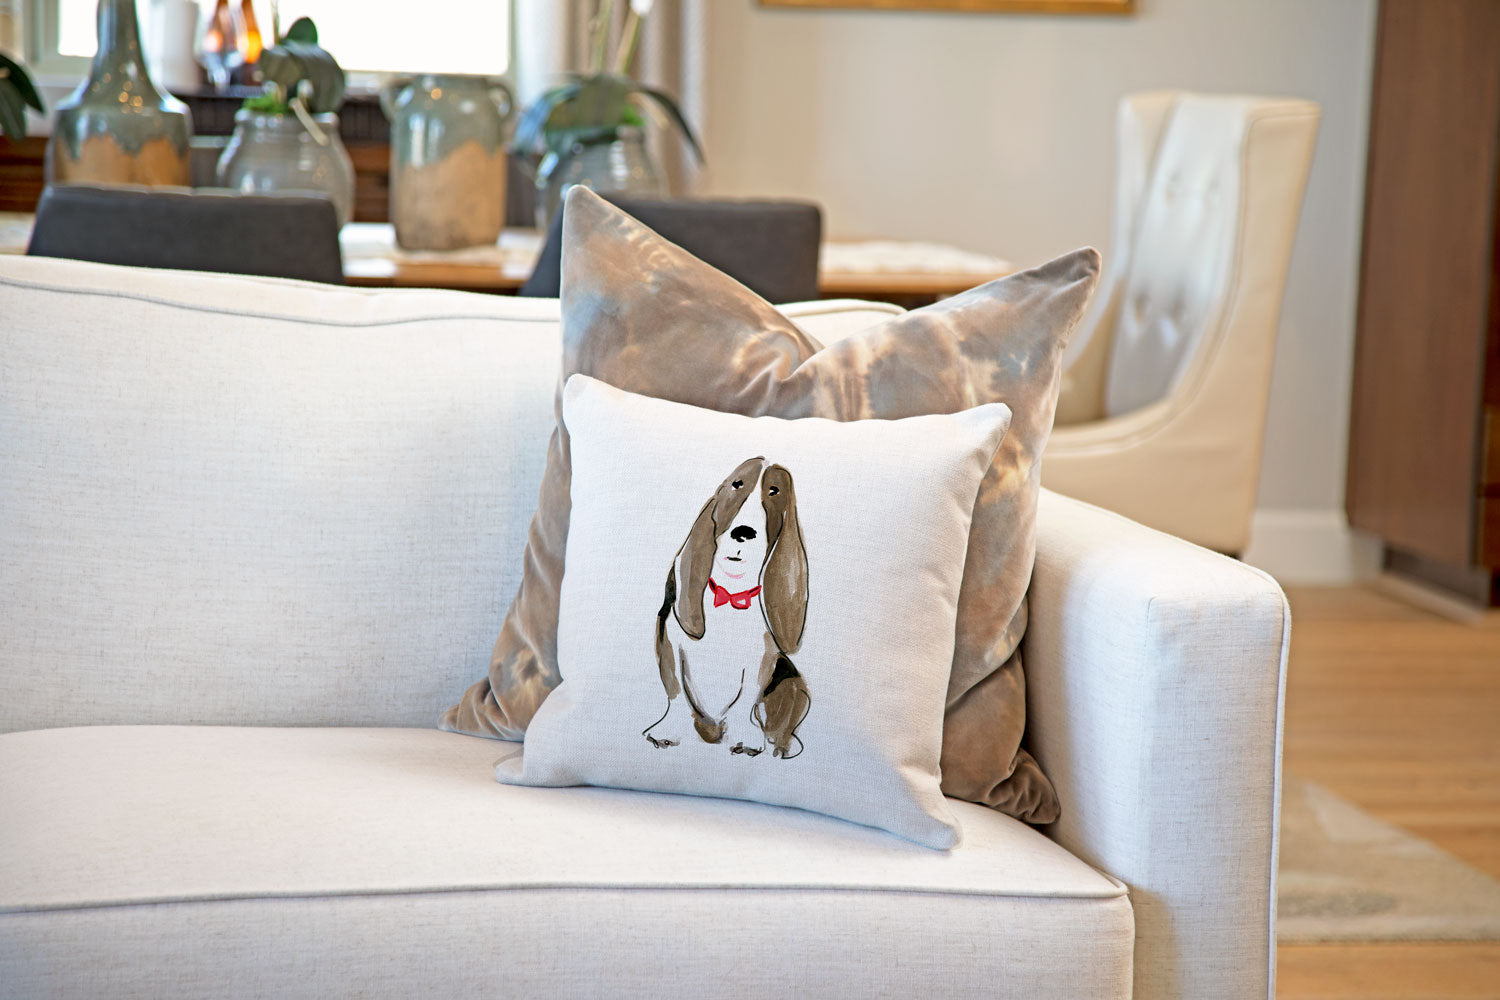 Buster Basset Throw Pillow Cover - Dog Illustration Throw Pillow Cover Collection-Di Lewis